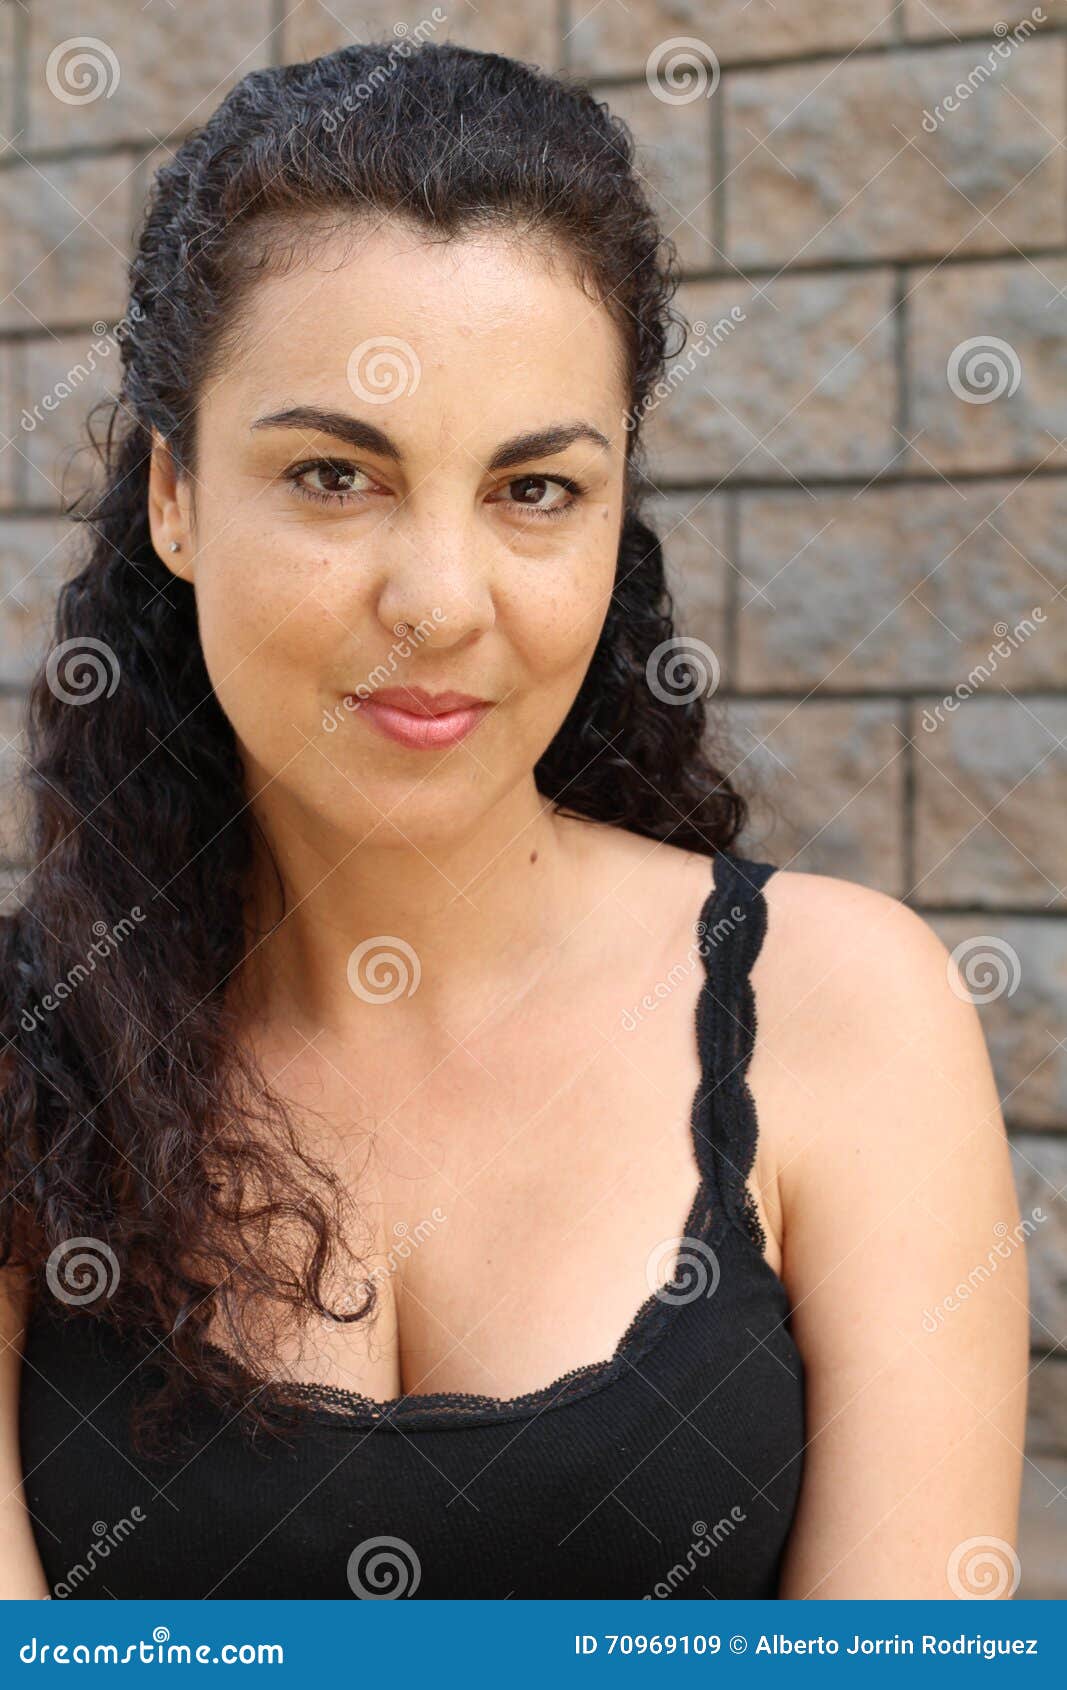 Dressed Mature Woman On Textured Wall Stock Image Image